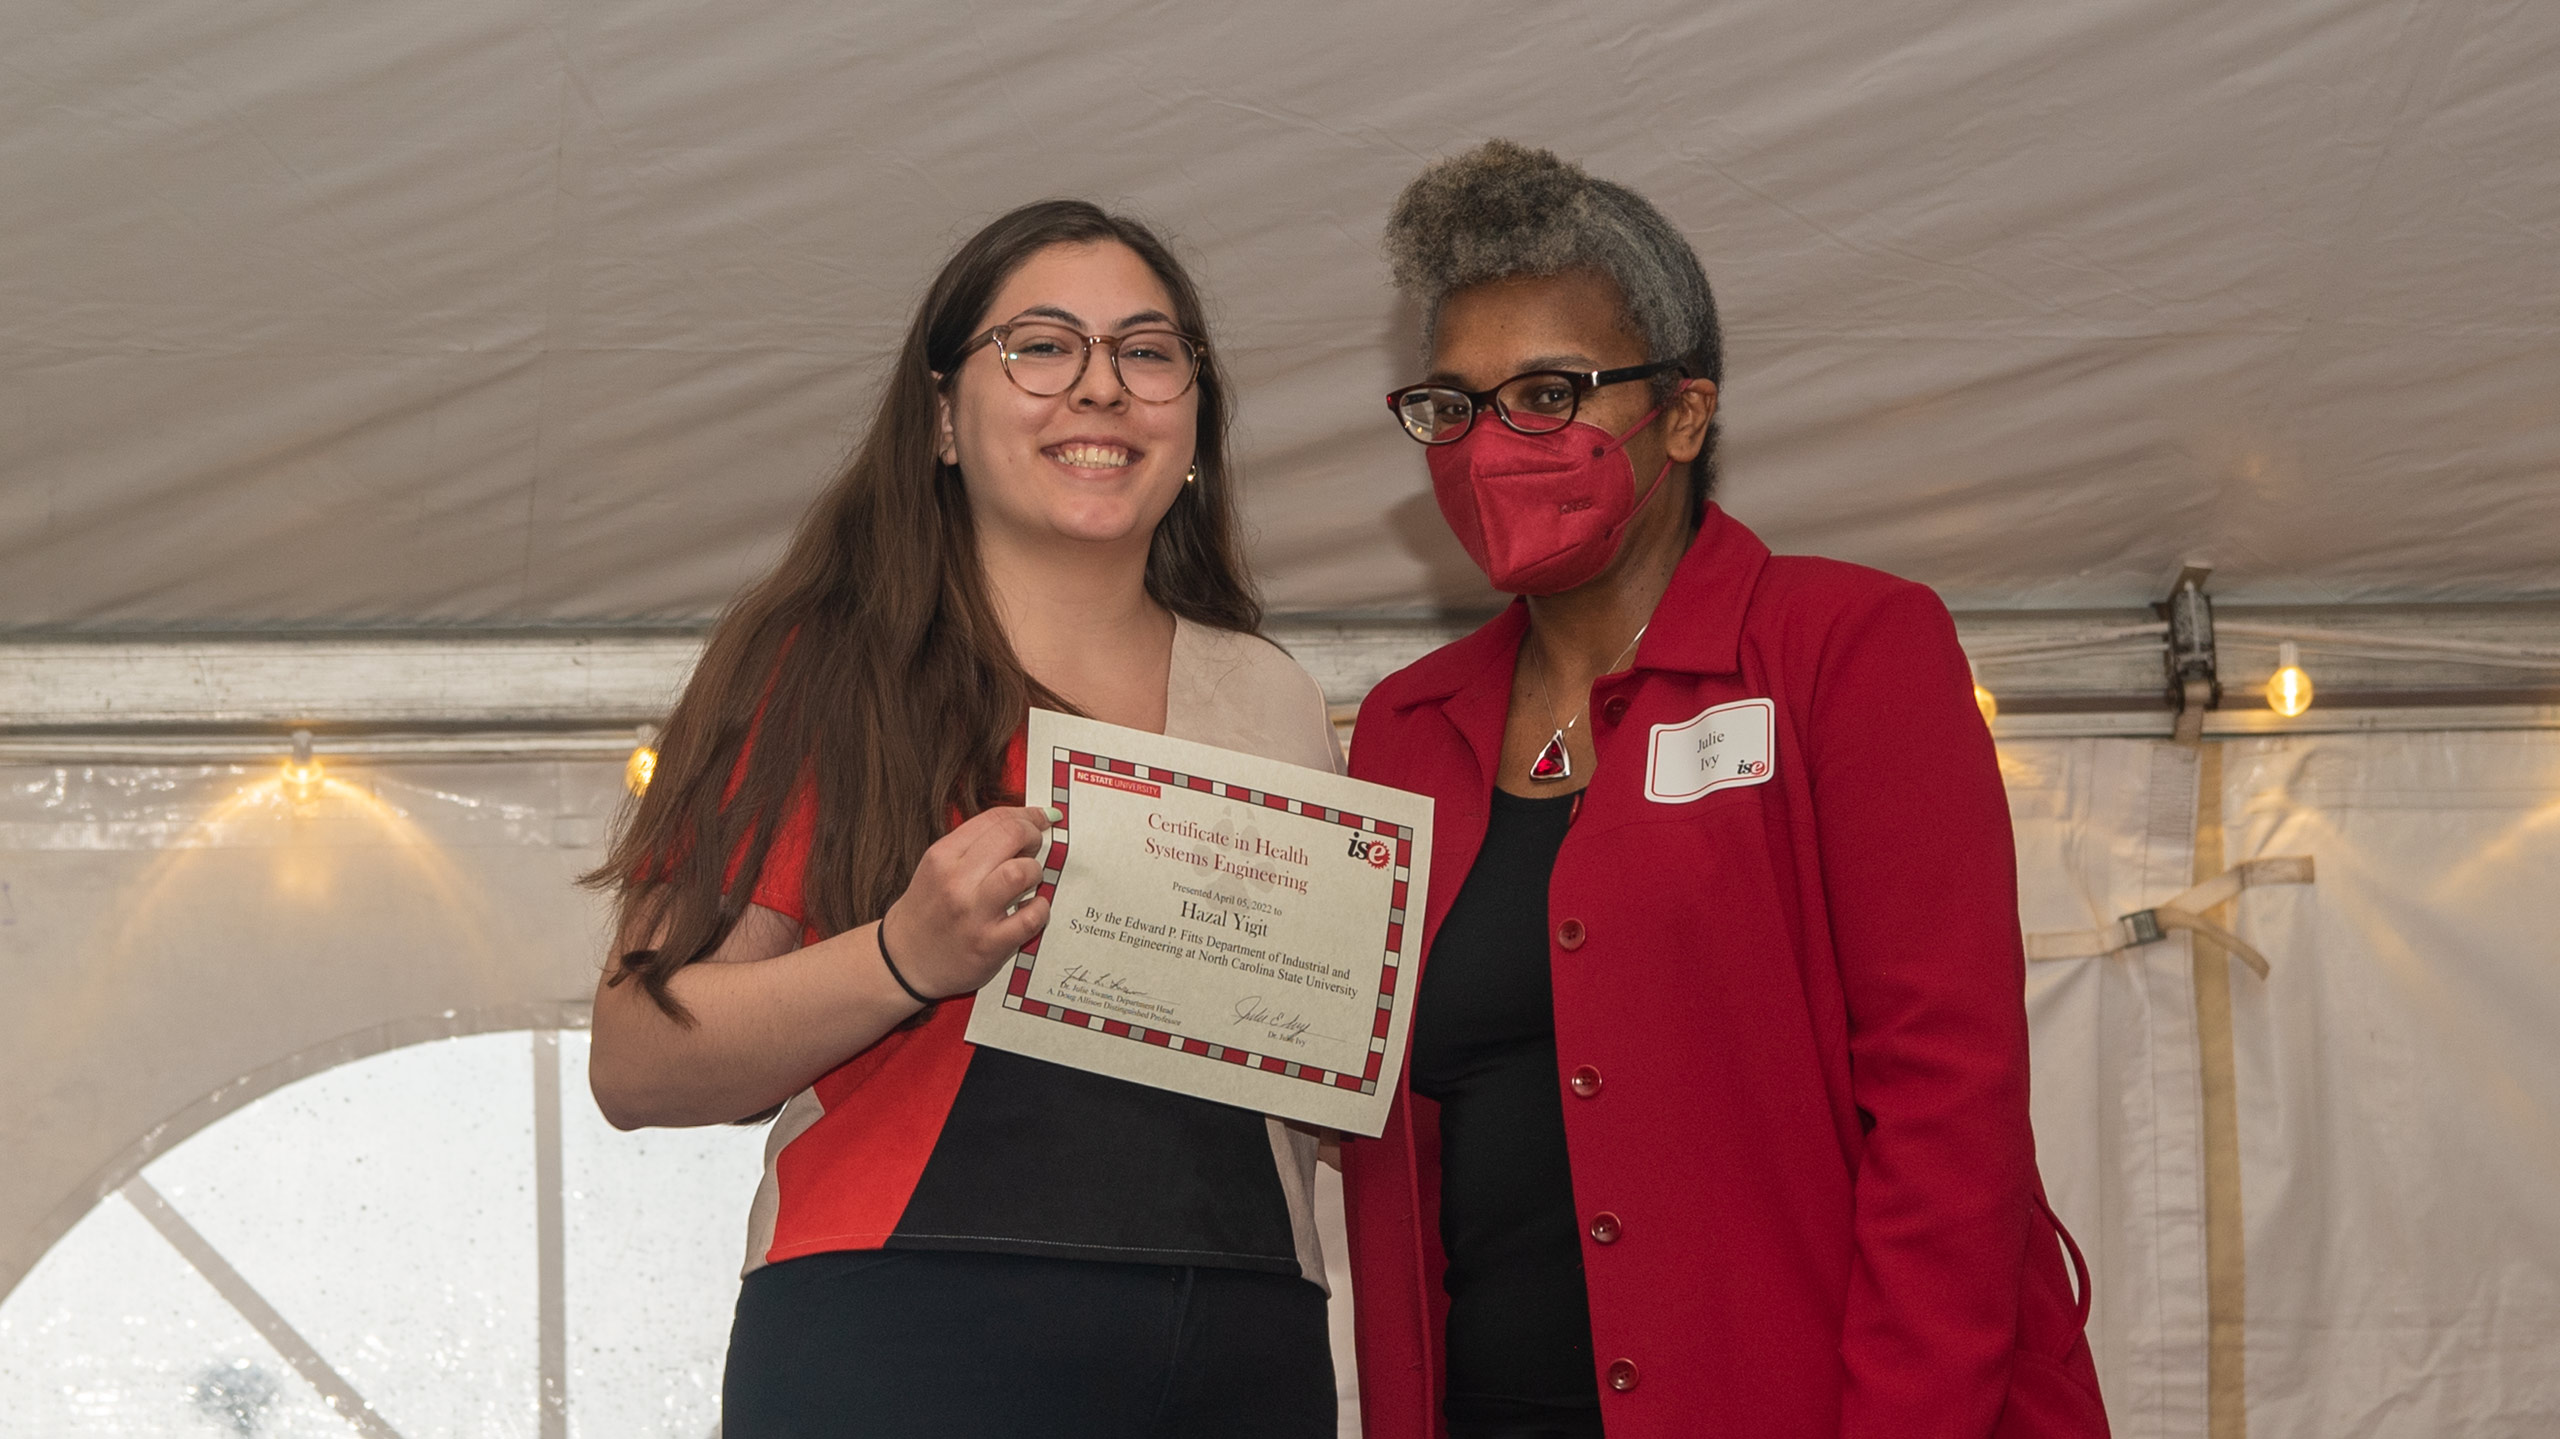 Hazal Yigit receiving her Healthcare Systems Engineering Certificate at the 2022 C.A. Anderson Awards